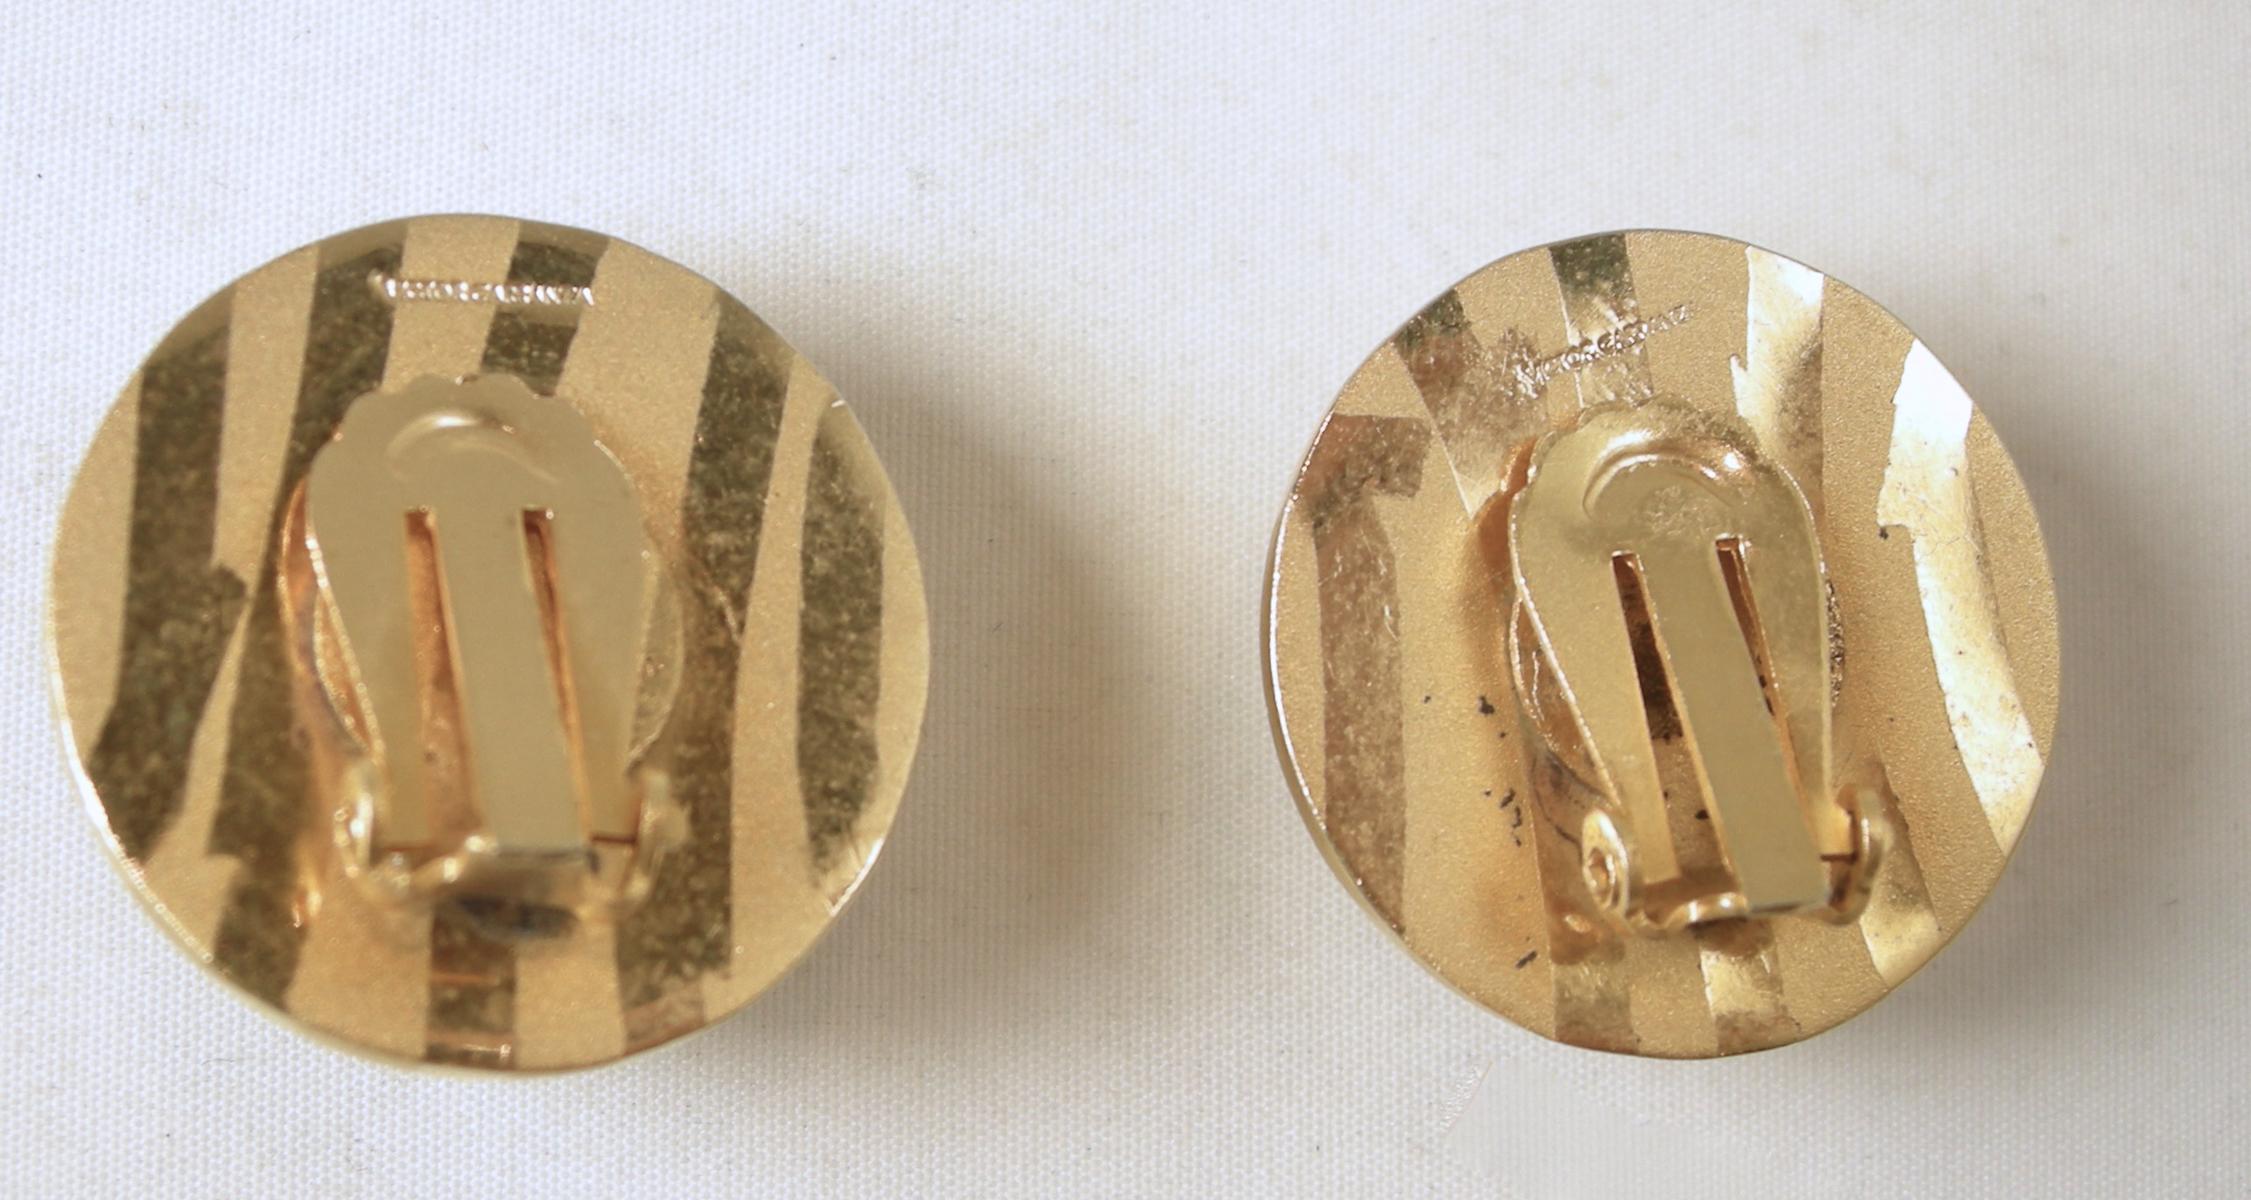 These vintage signed Victor Carranza gold tone earrings have a matte & gloss gold tone stripe ball design. These clip earrings measure 1” across and are signed “Victor Carranza”. They are in excellent condition.